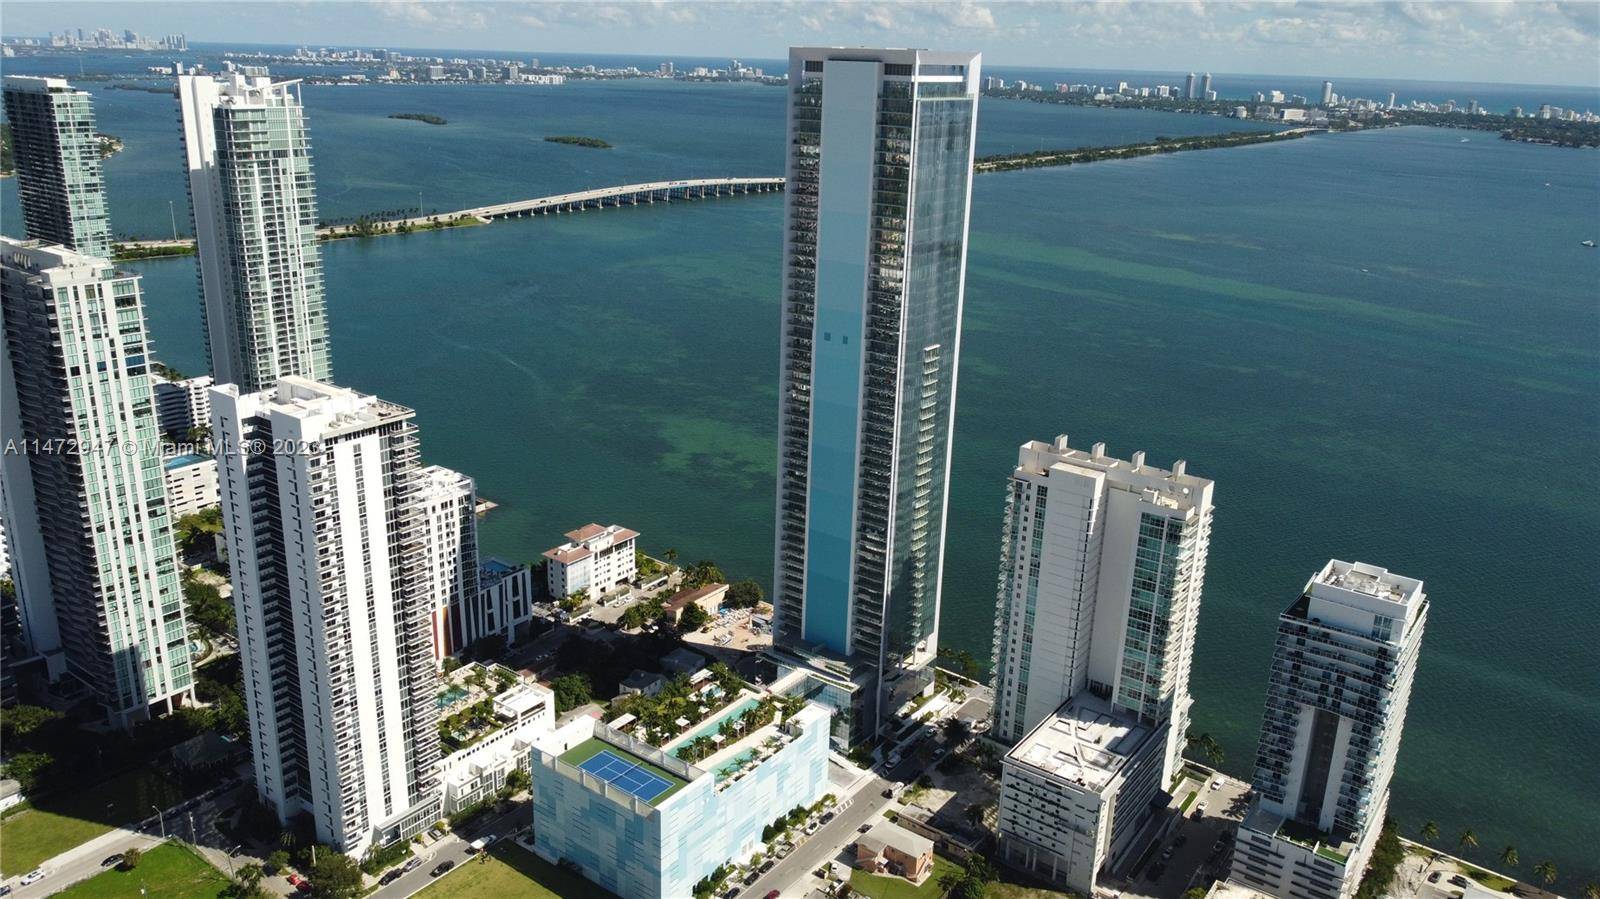 Luxury 2 Bedroom 2 Bathroom Apartment in the heart of Miami, with a breathtaking 180 degree view that stretches across the ocean and cityscape.